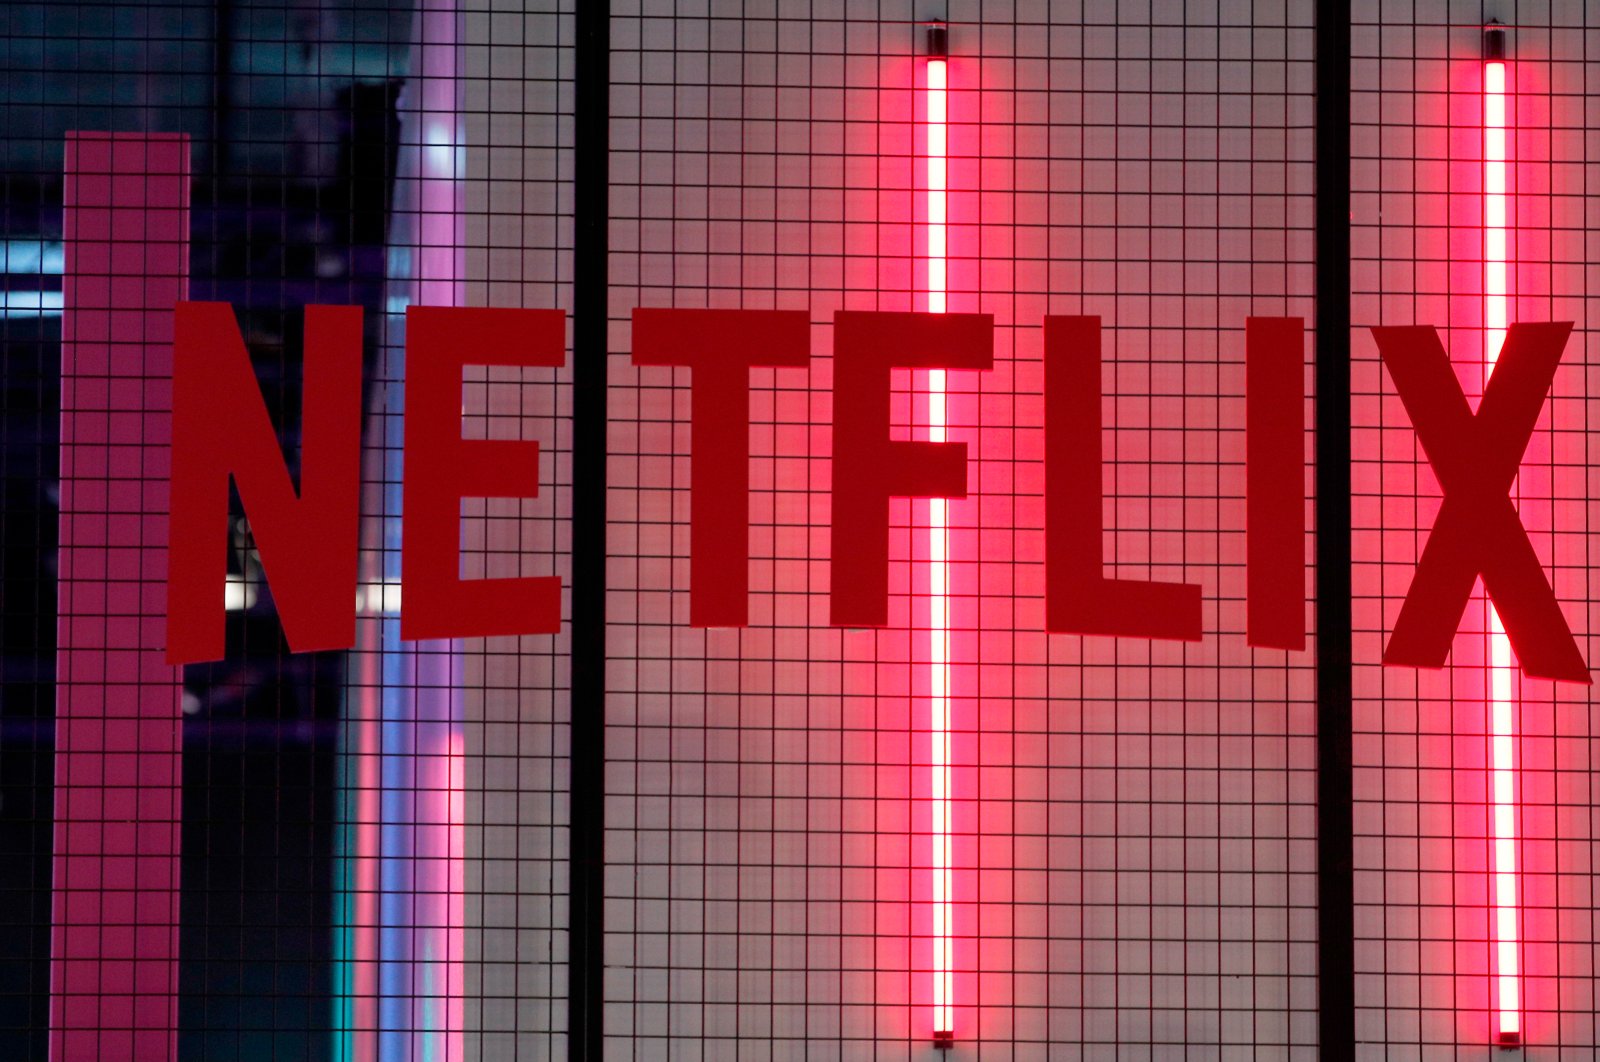 The logo of Netflix on display at the Paris Games Week event in Paris, France, Nov. 4, 2017. (AP Photo)